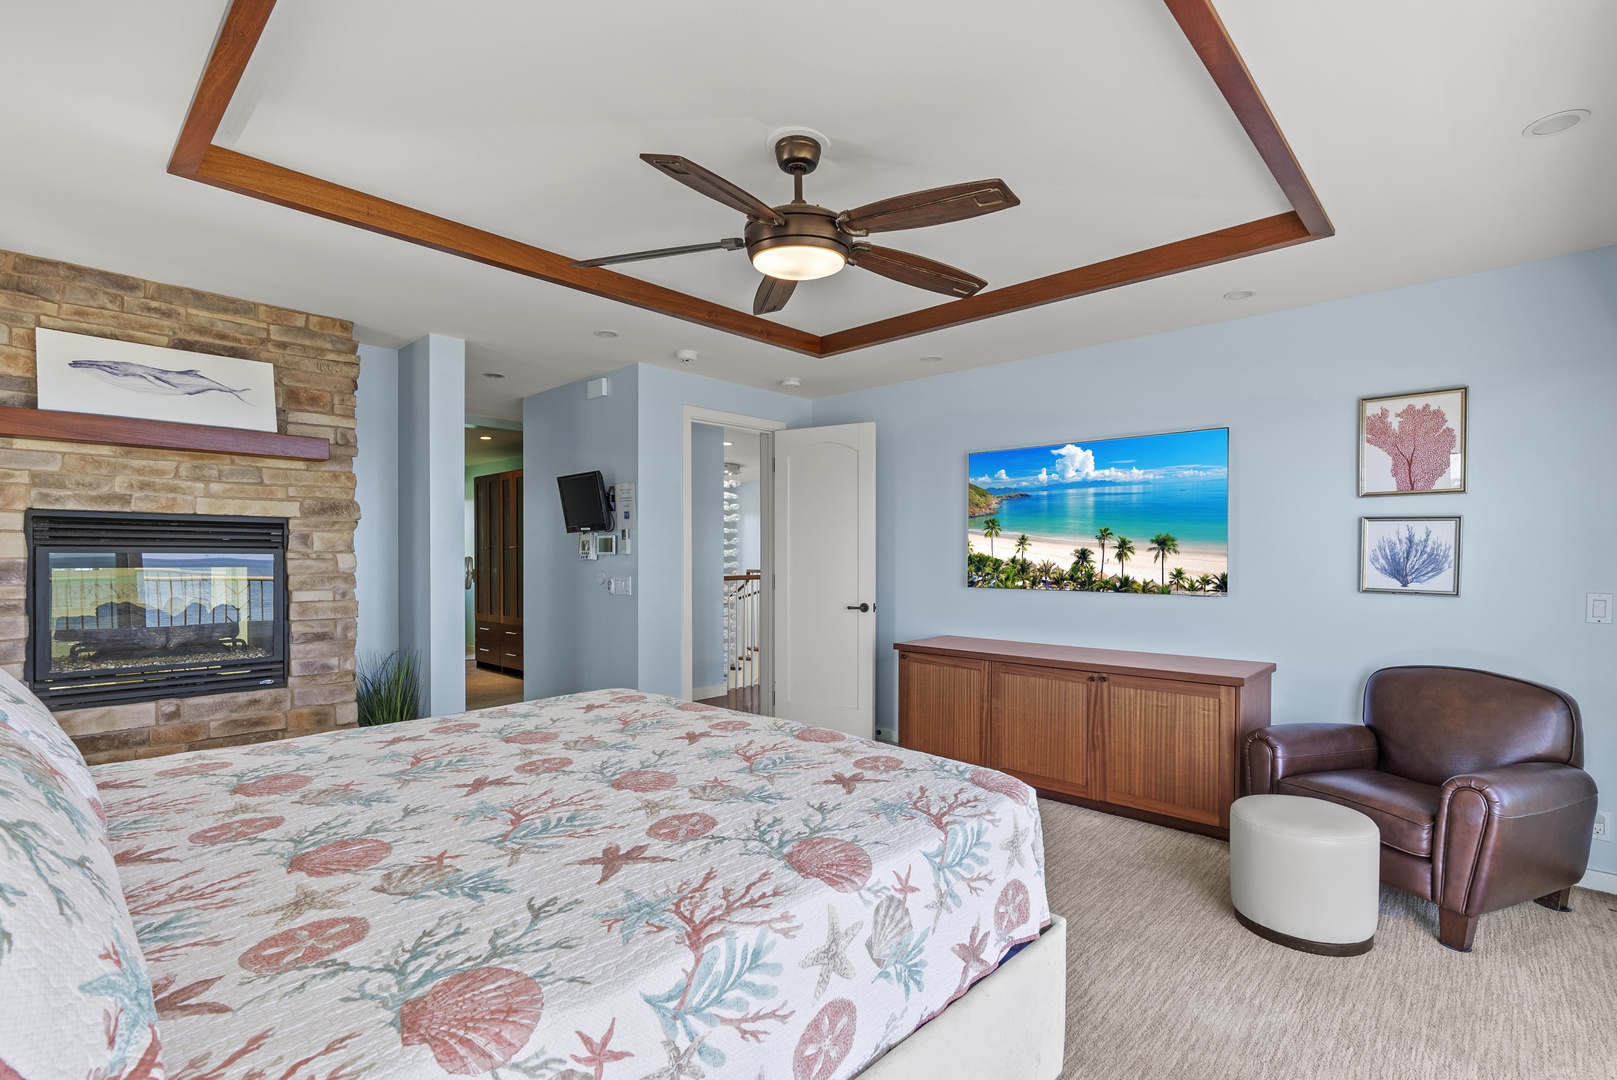 Waialua Vacation Rentals, Kala'iku Estate - Tv in each room will be perfect for movie time!